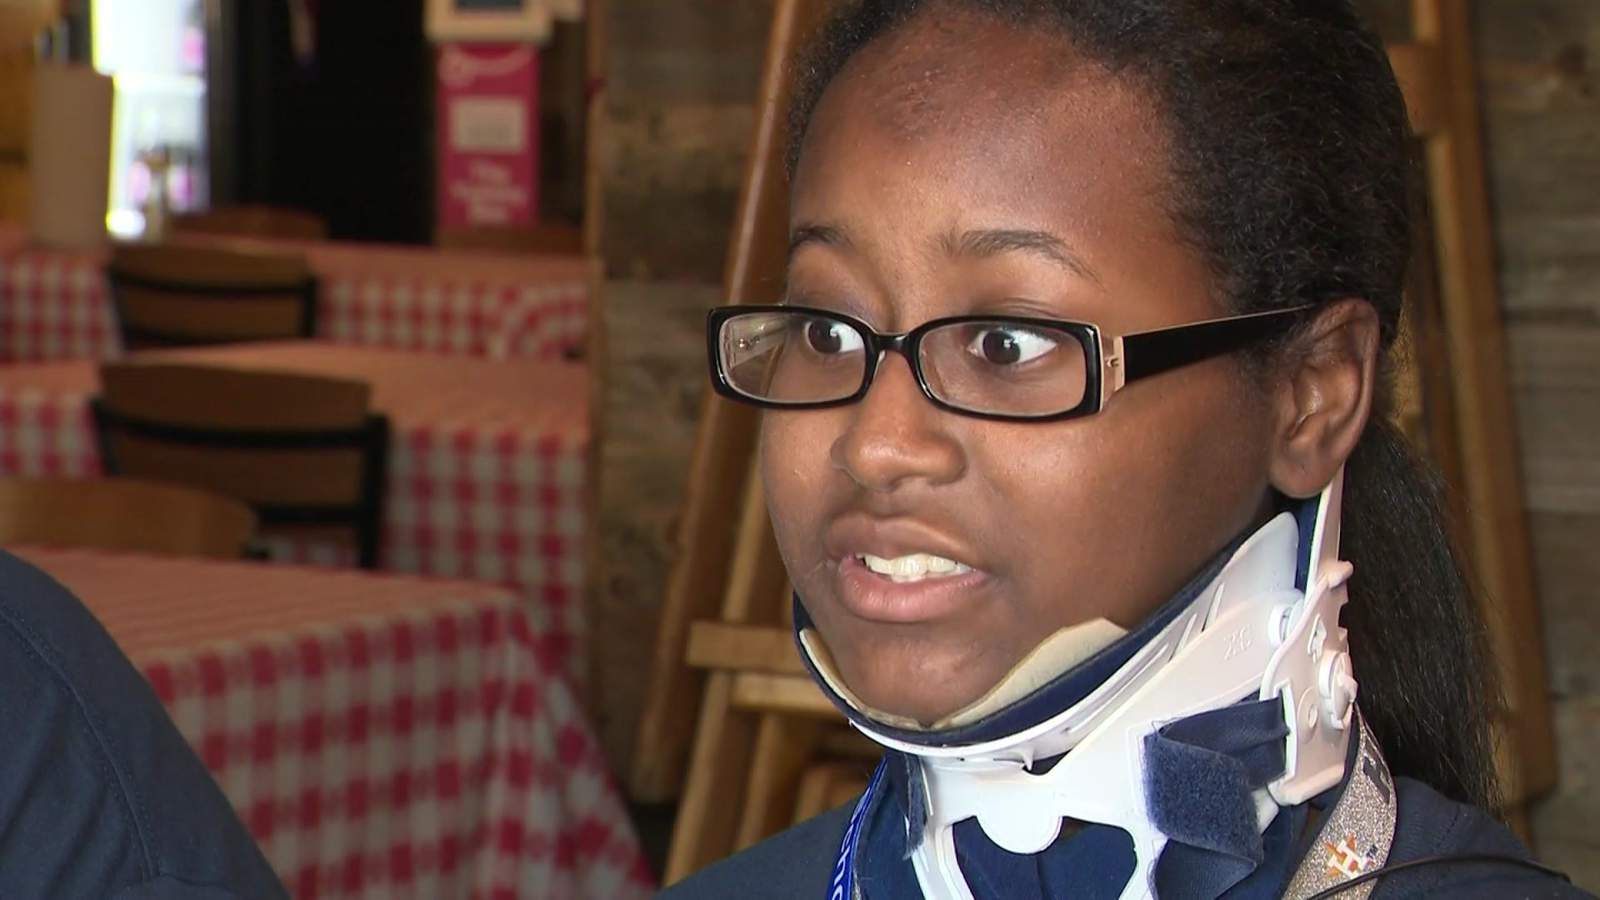 13-year-old girl finally back home after hit-and-run incident left her severely injured